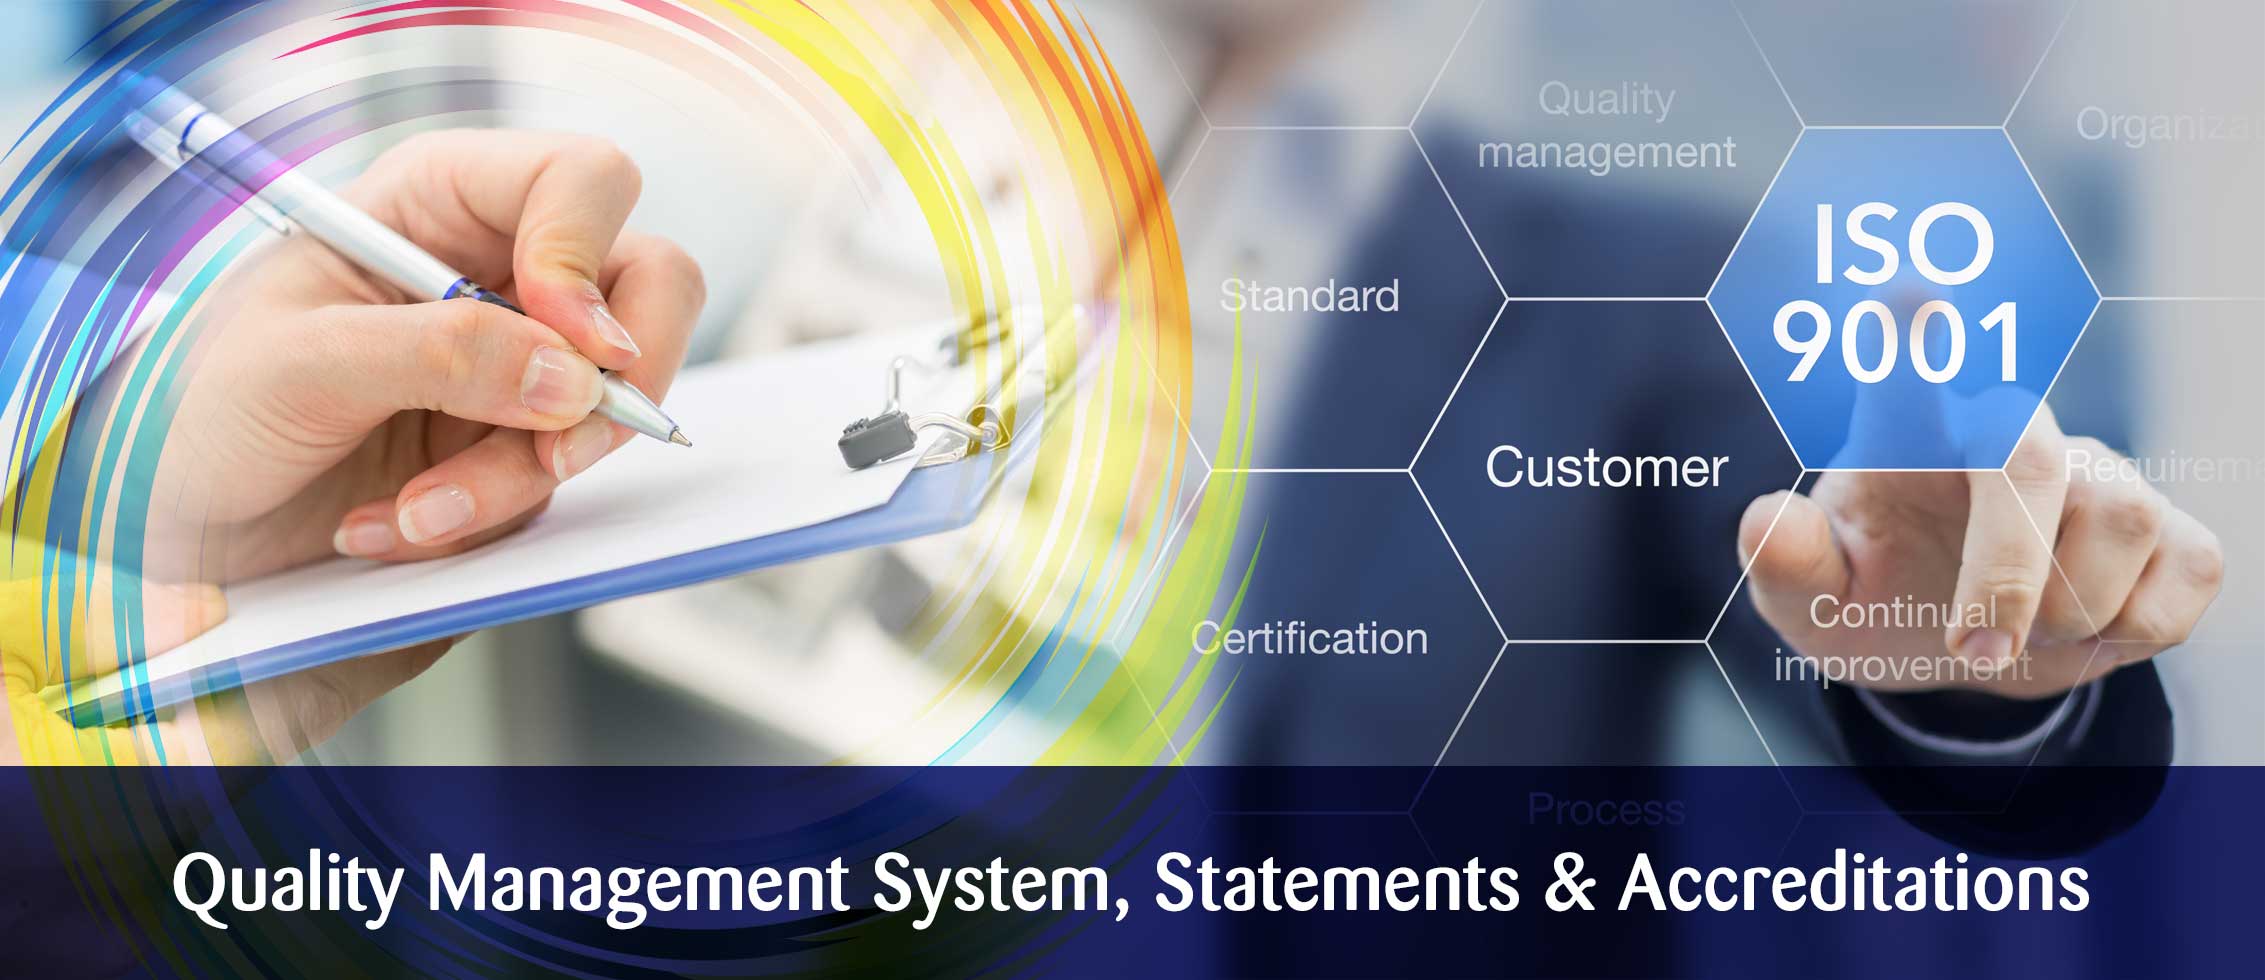 Quality Management System, Statements and Accreditations